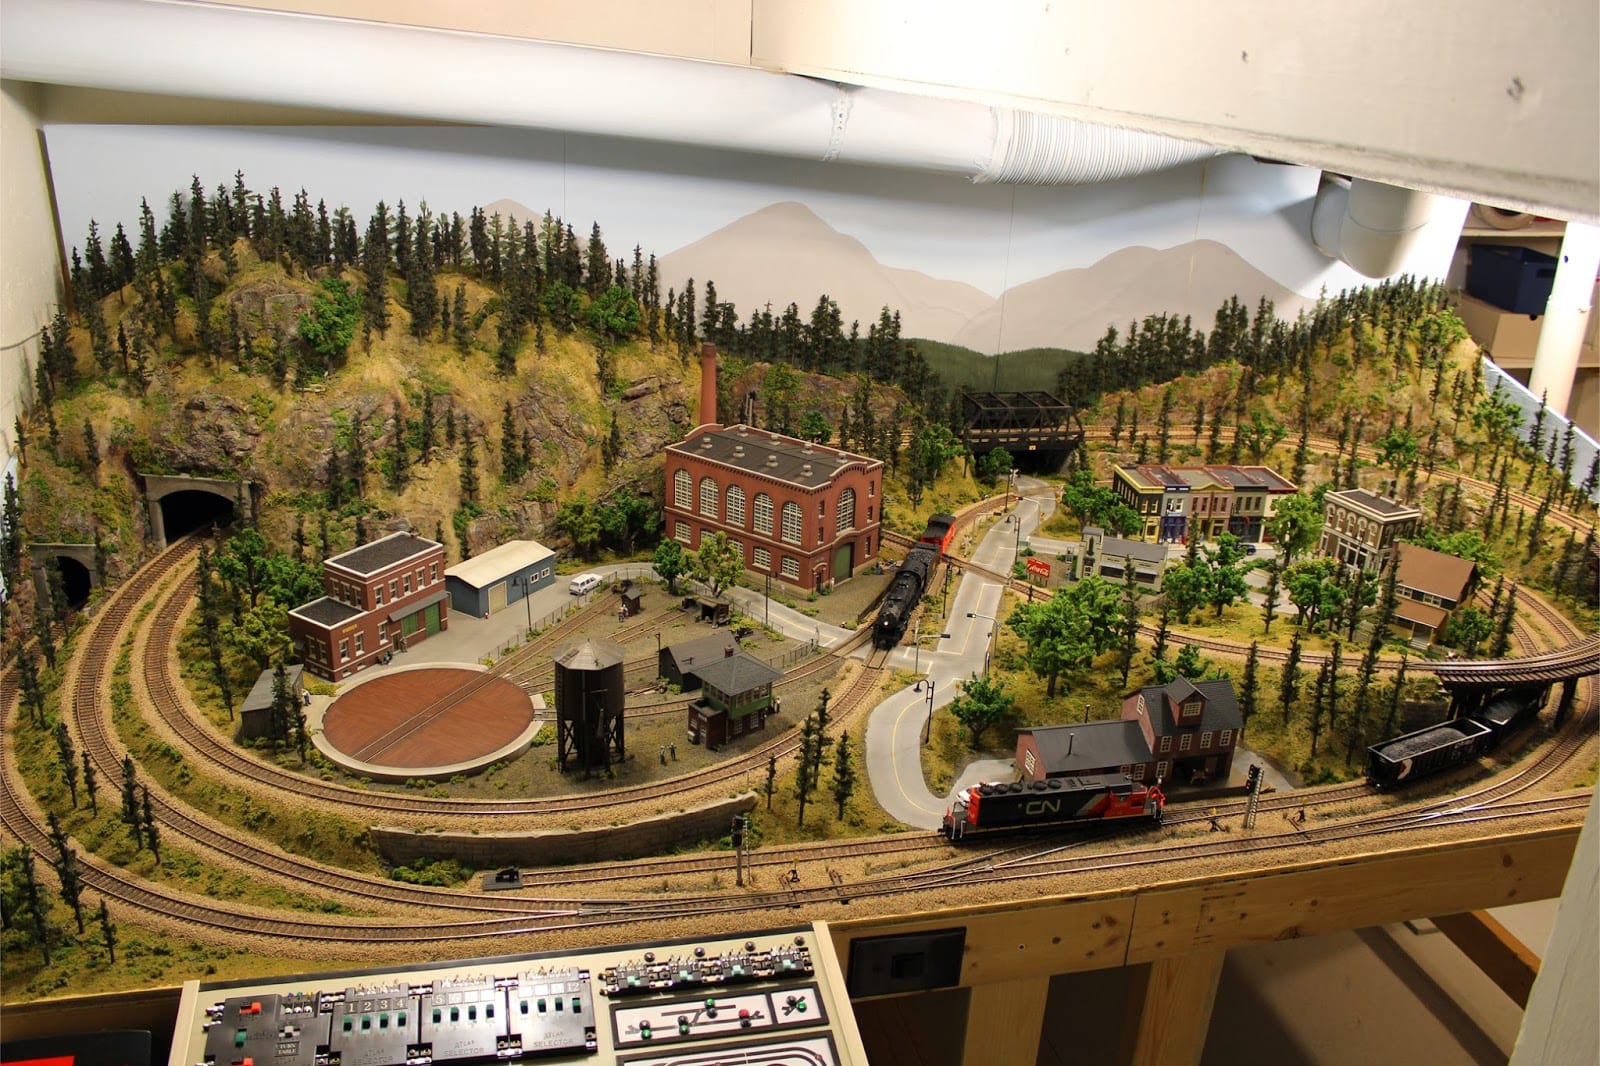 Making the tunnel of model train layouts